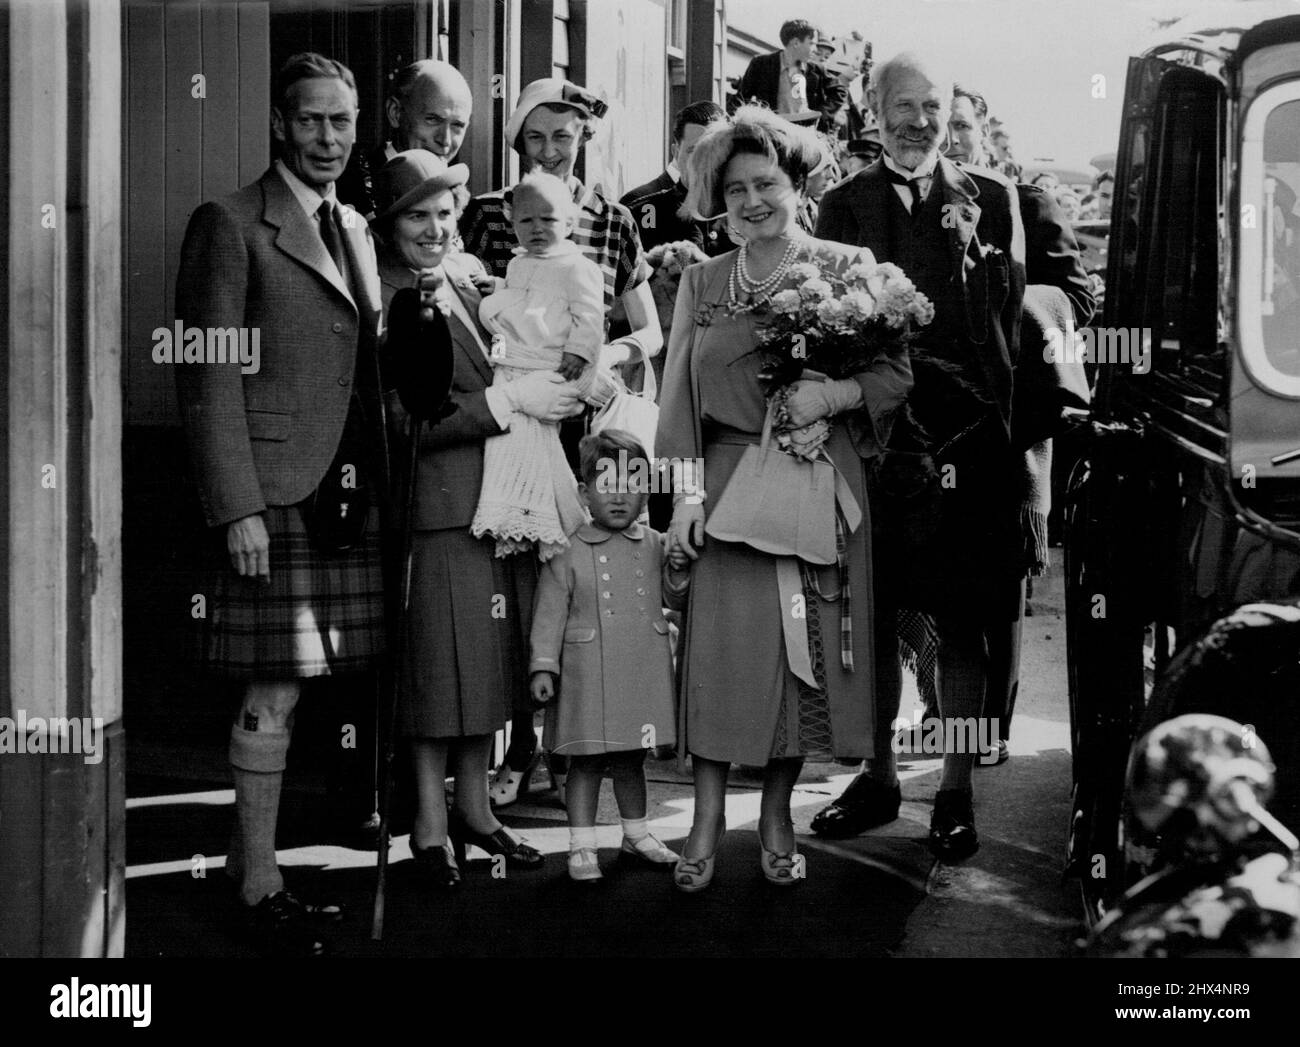 A Family Gathering To Celebrate The Queen's Birthday The King and Queen with Prince Charles and Princess Anne seen on their arrival at Balmoral, Scotland, where Her Majesty's birthday is being celebrated in a family party this weekend. His Majesty has been making a resolute fight against ill-health and will continue his convalescence in Scotland. August 5, 1951. (Photo by Paul Popper, Paul Popper Ltd.). Stock Photo